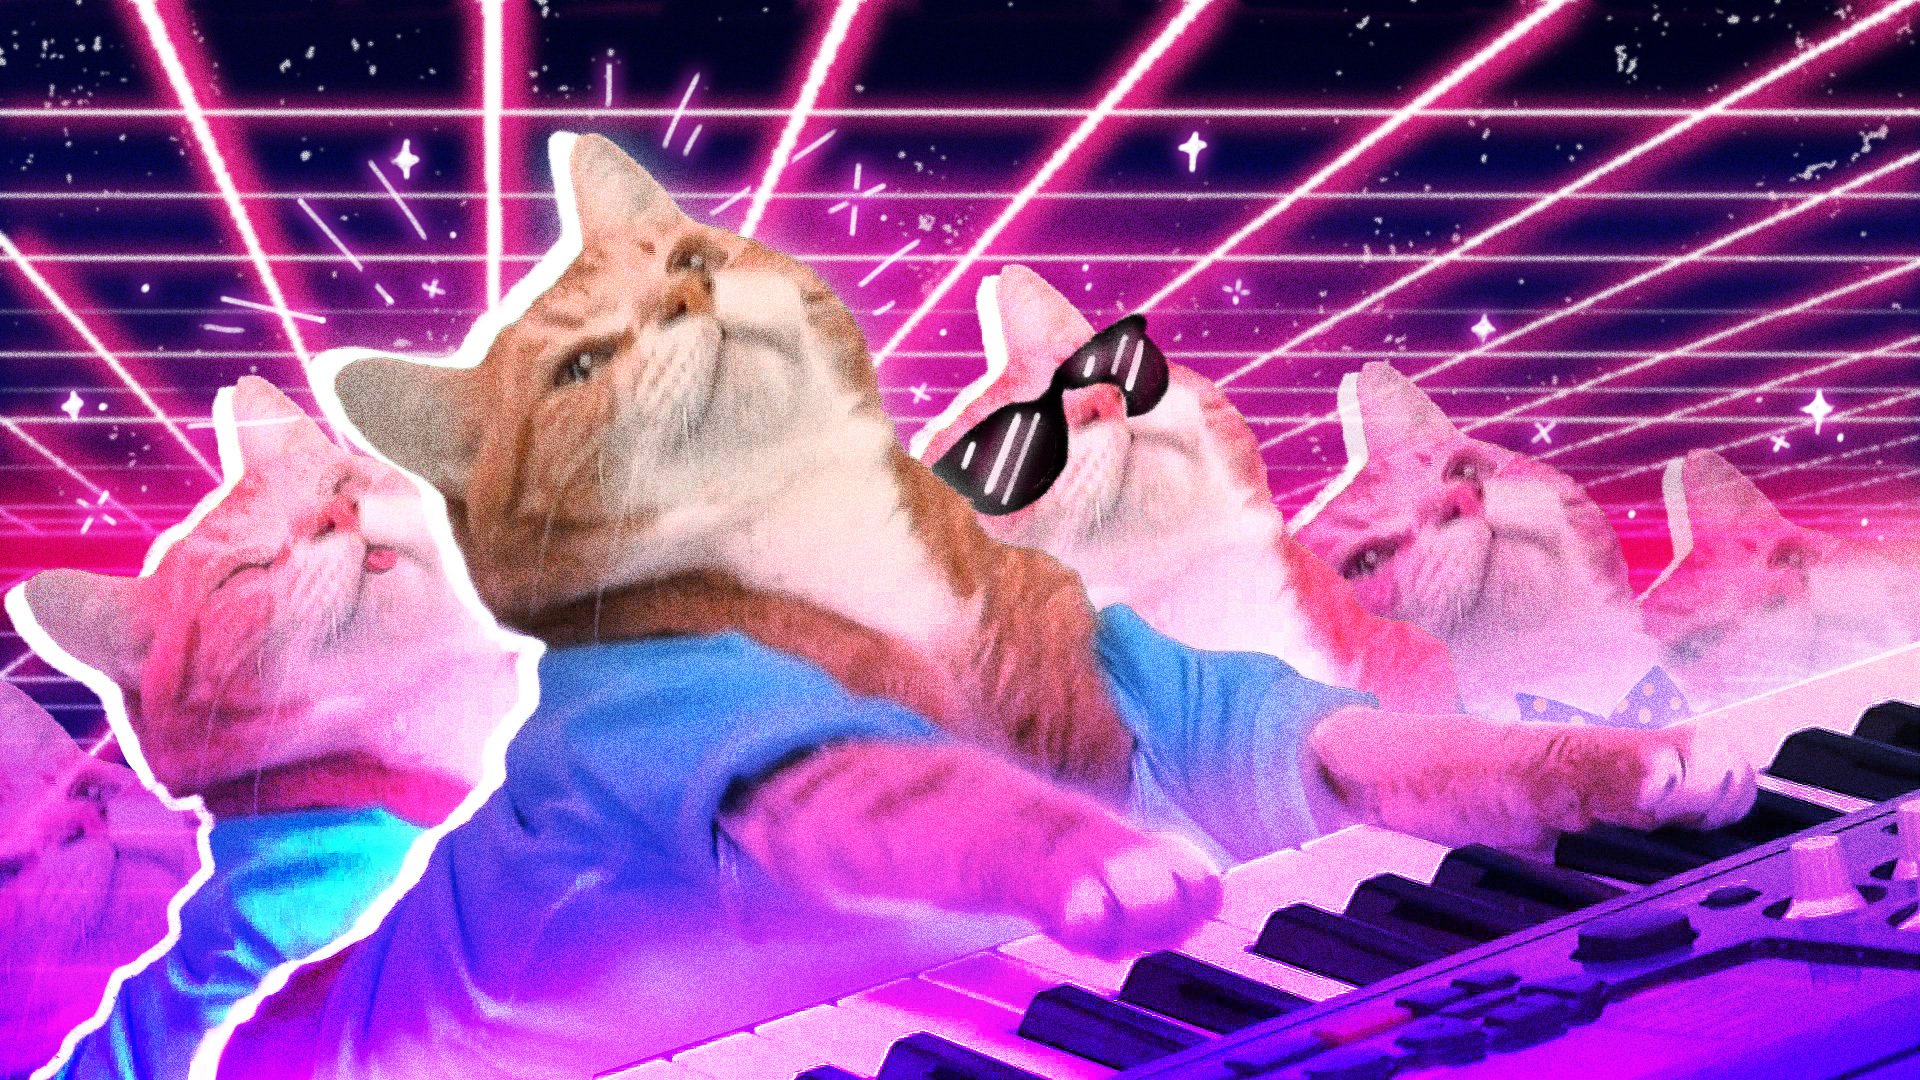 Keyboard cat sits at his piano in a blue shirt, surrounded by blue and pink galactic effects.